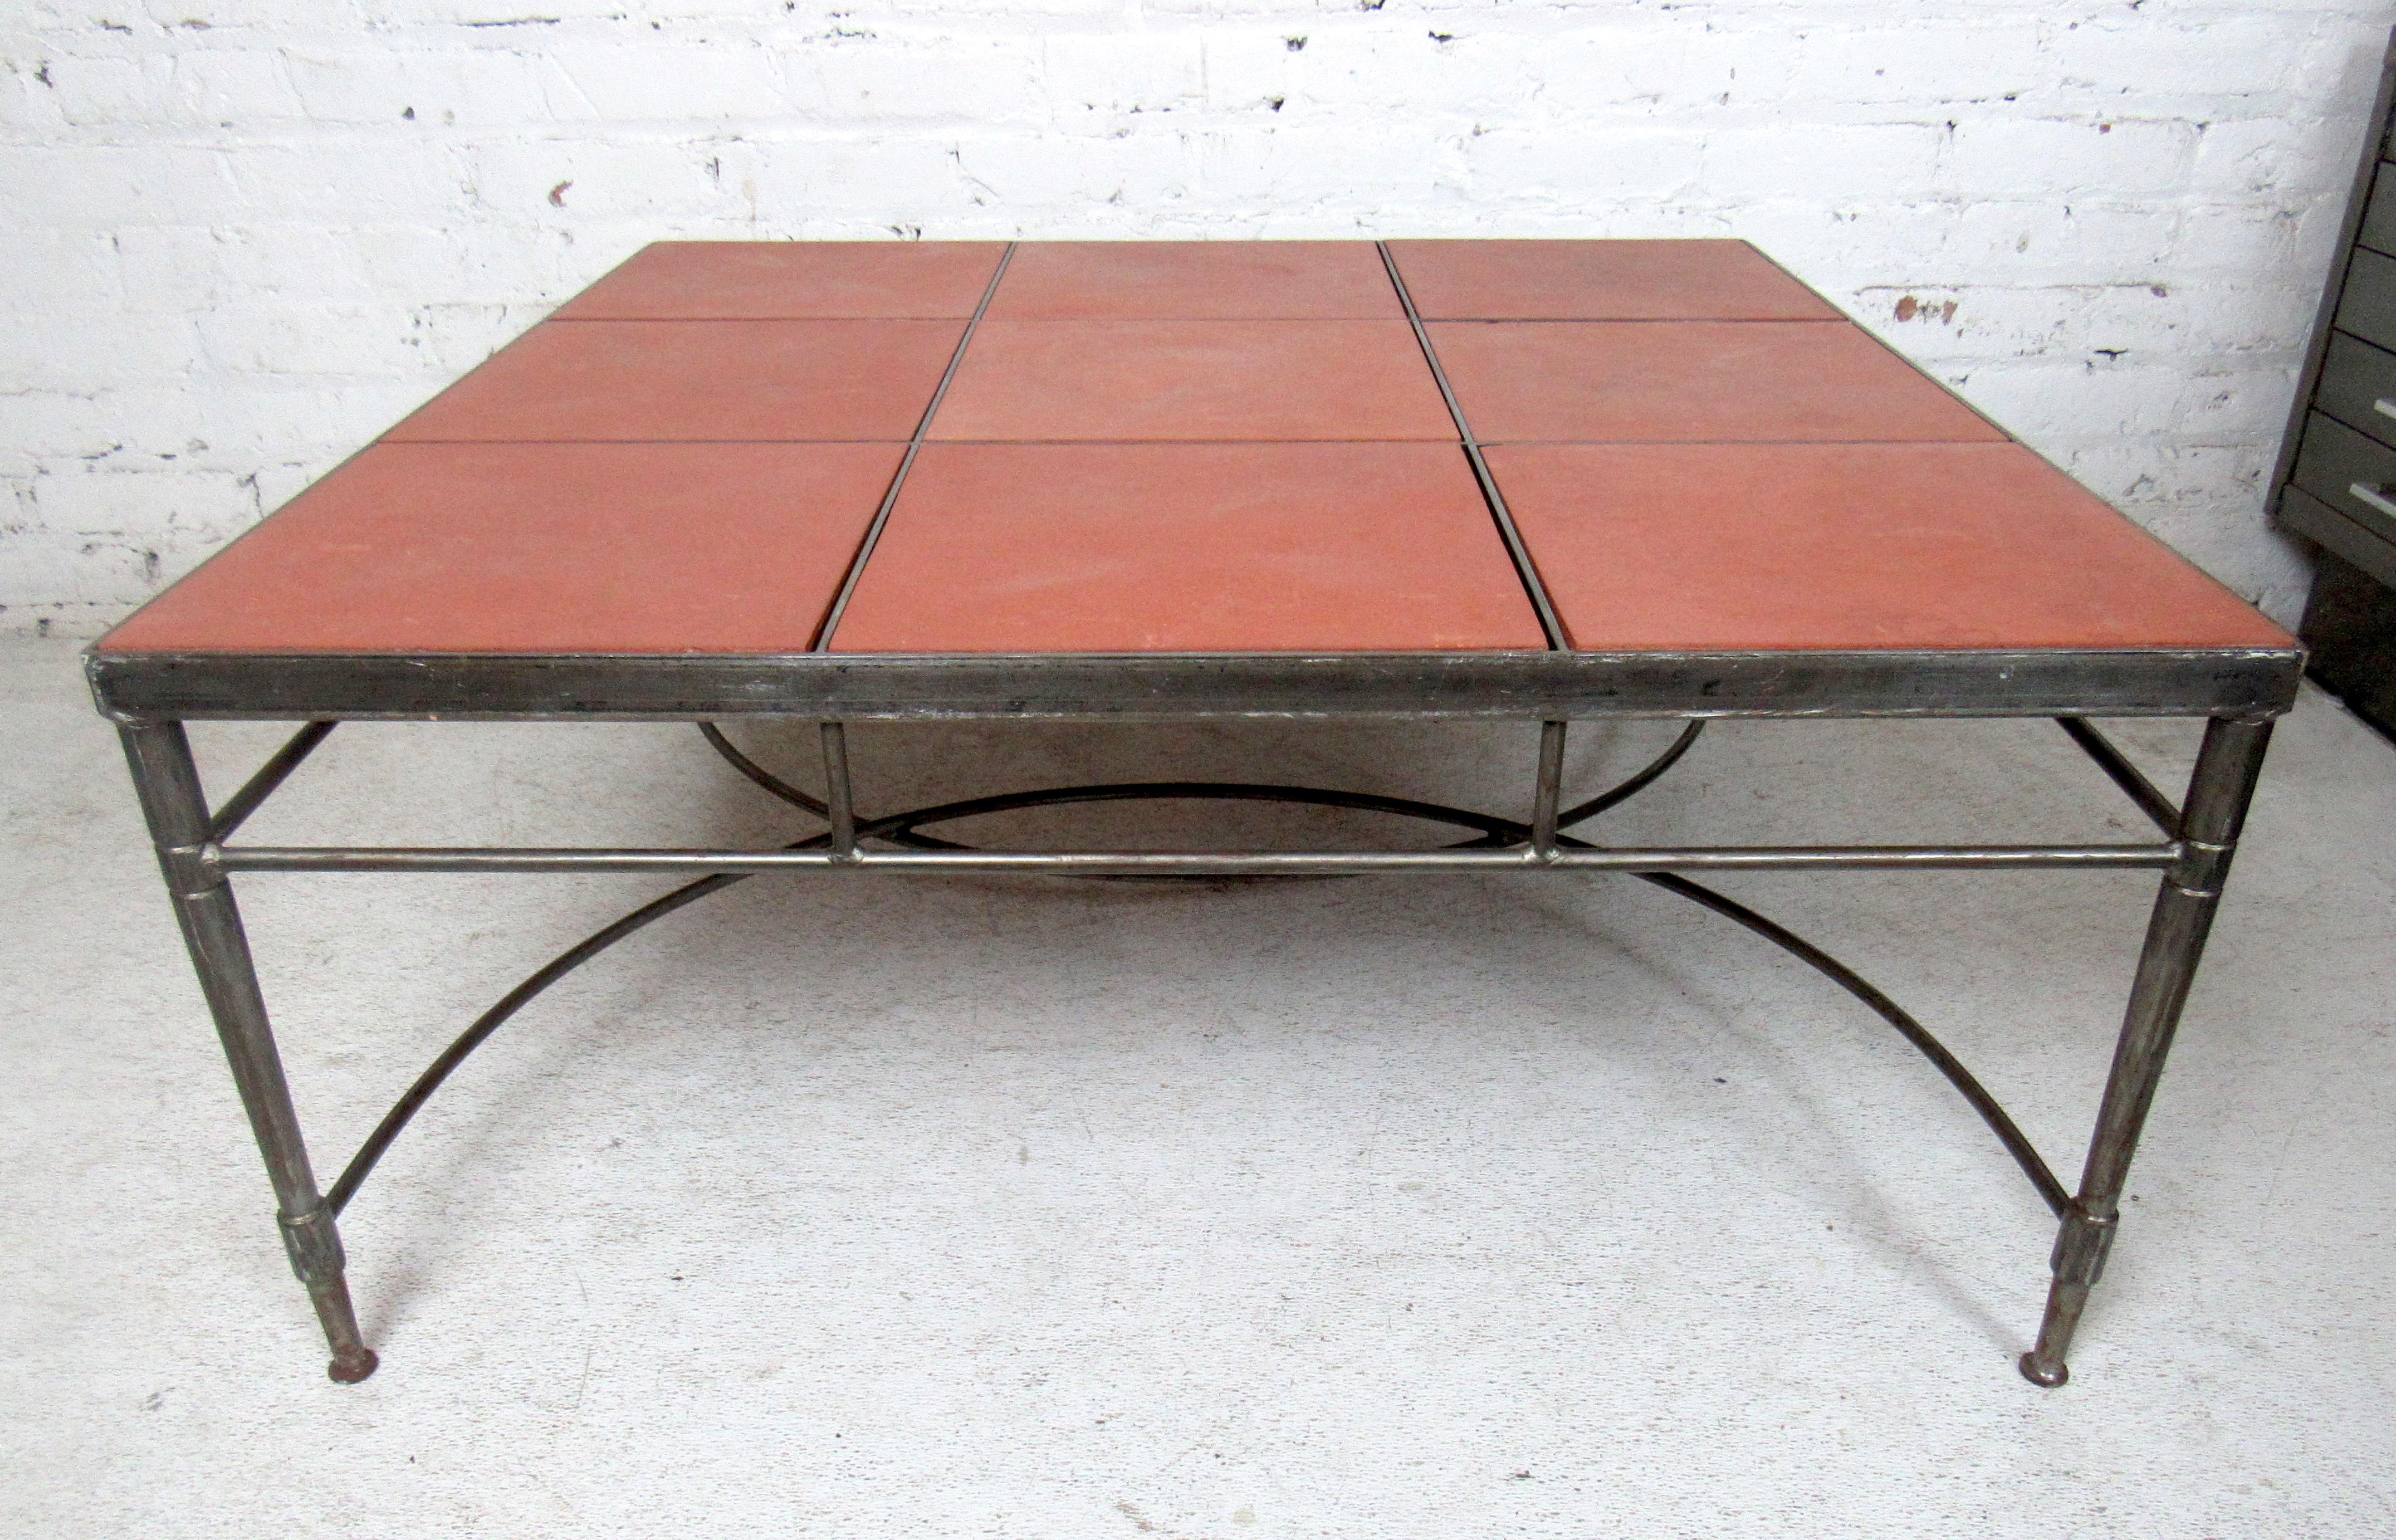 Square vintage metal coffee table featuring stone tile inserts.

(Please confirm item location - NY or NJ with dealer).